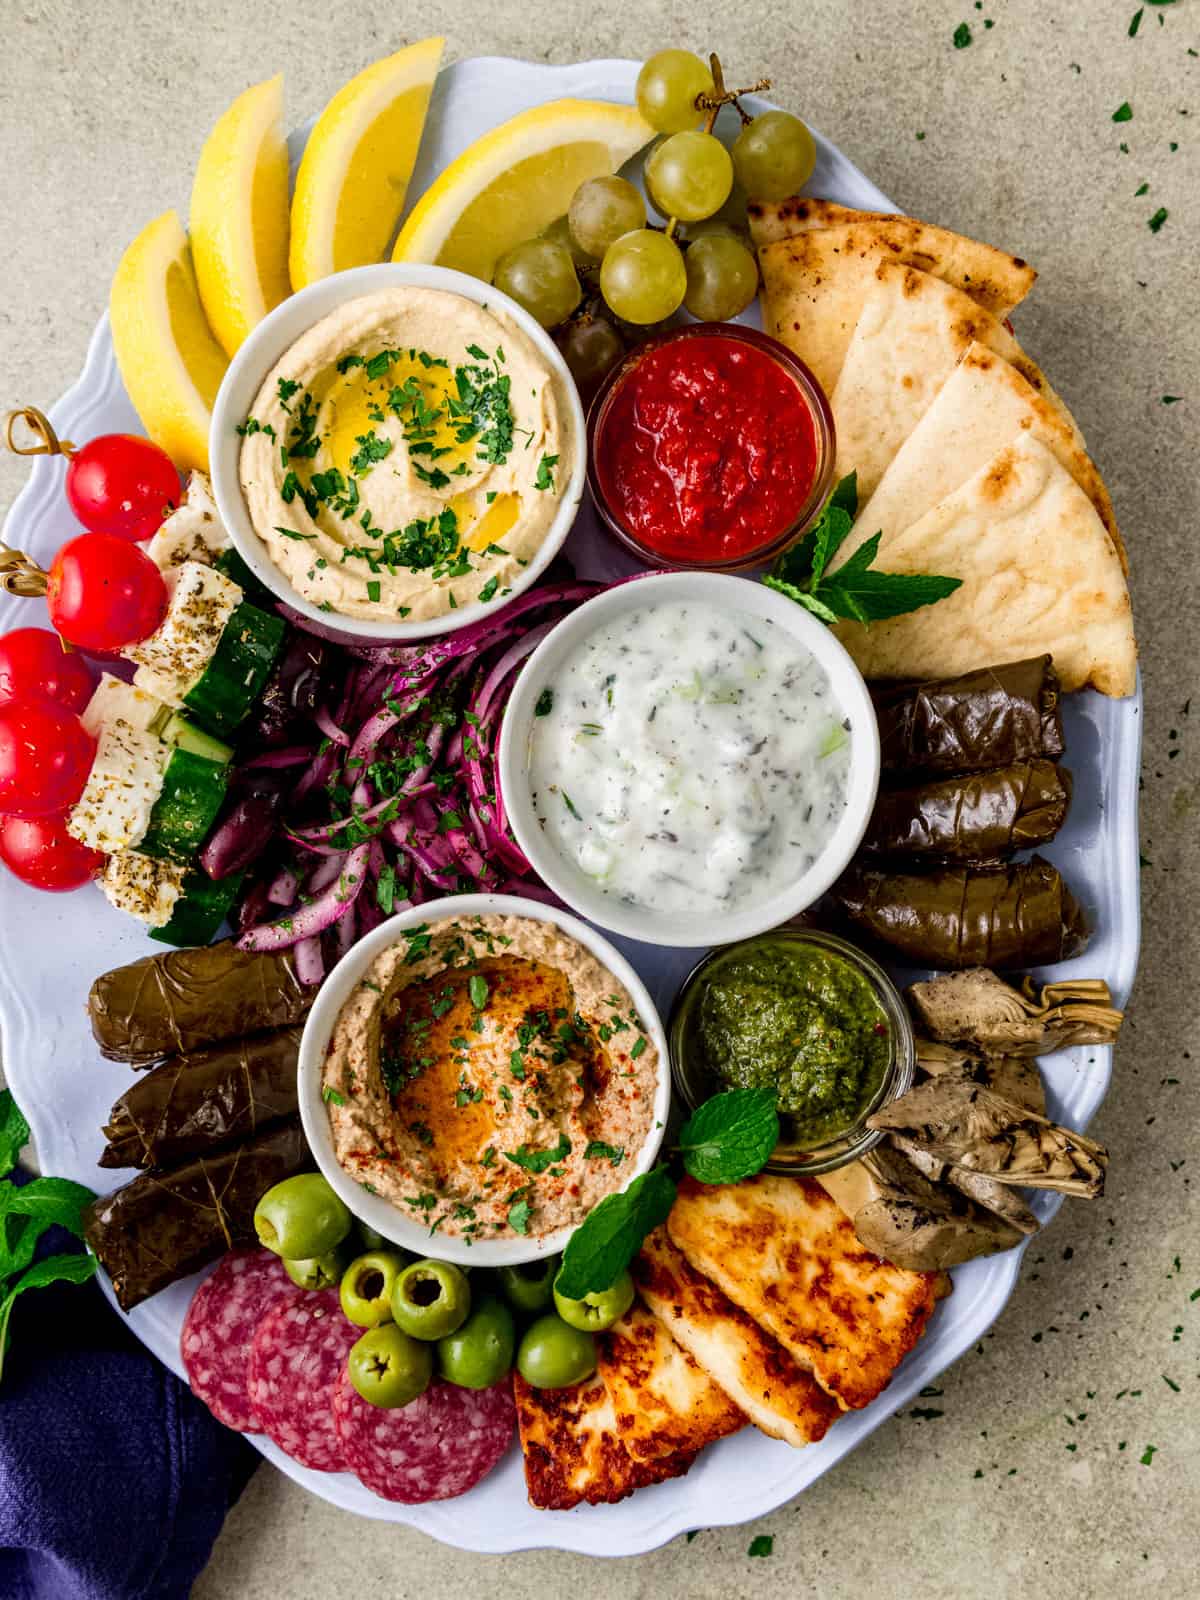 Loaded Mediterranean charcuterie board with salad skewers, stuffed grape leaves and hummus.